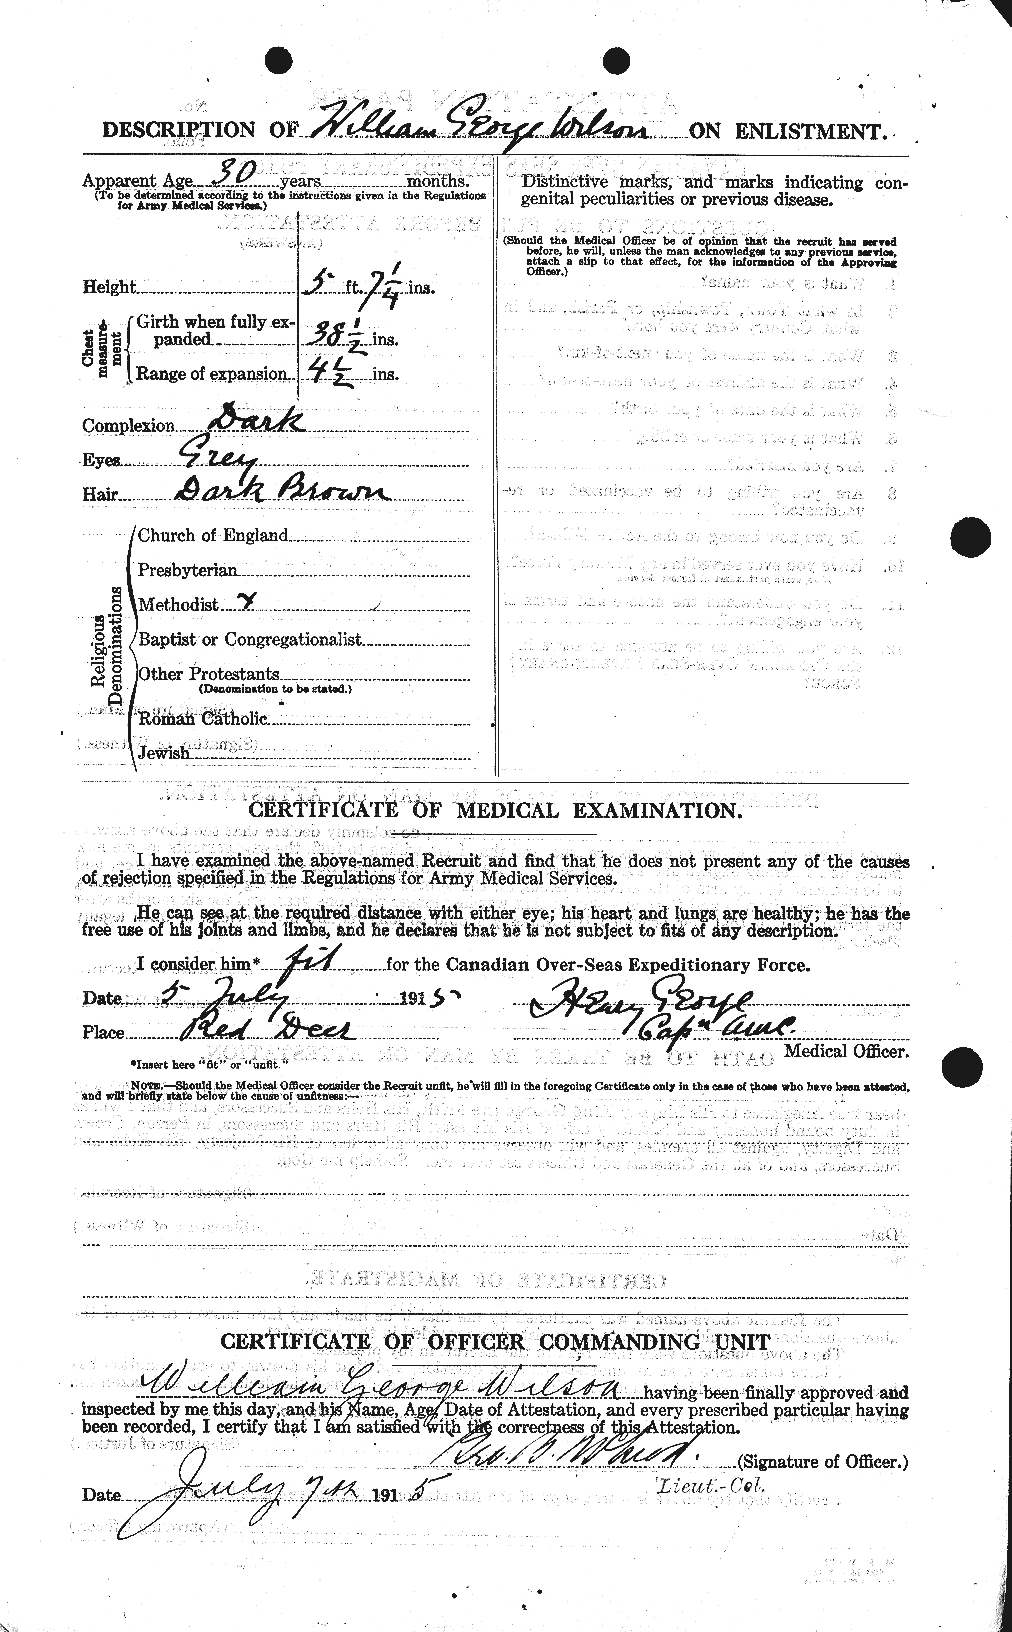 Personnel Records of the First World War - CEF 682001b